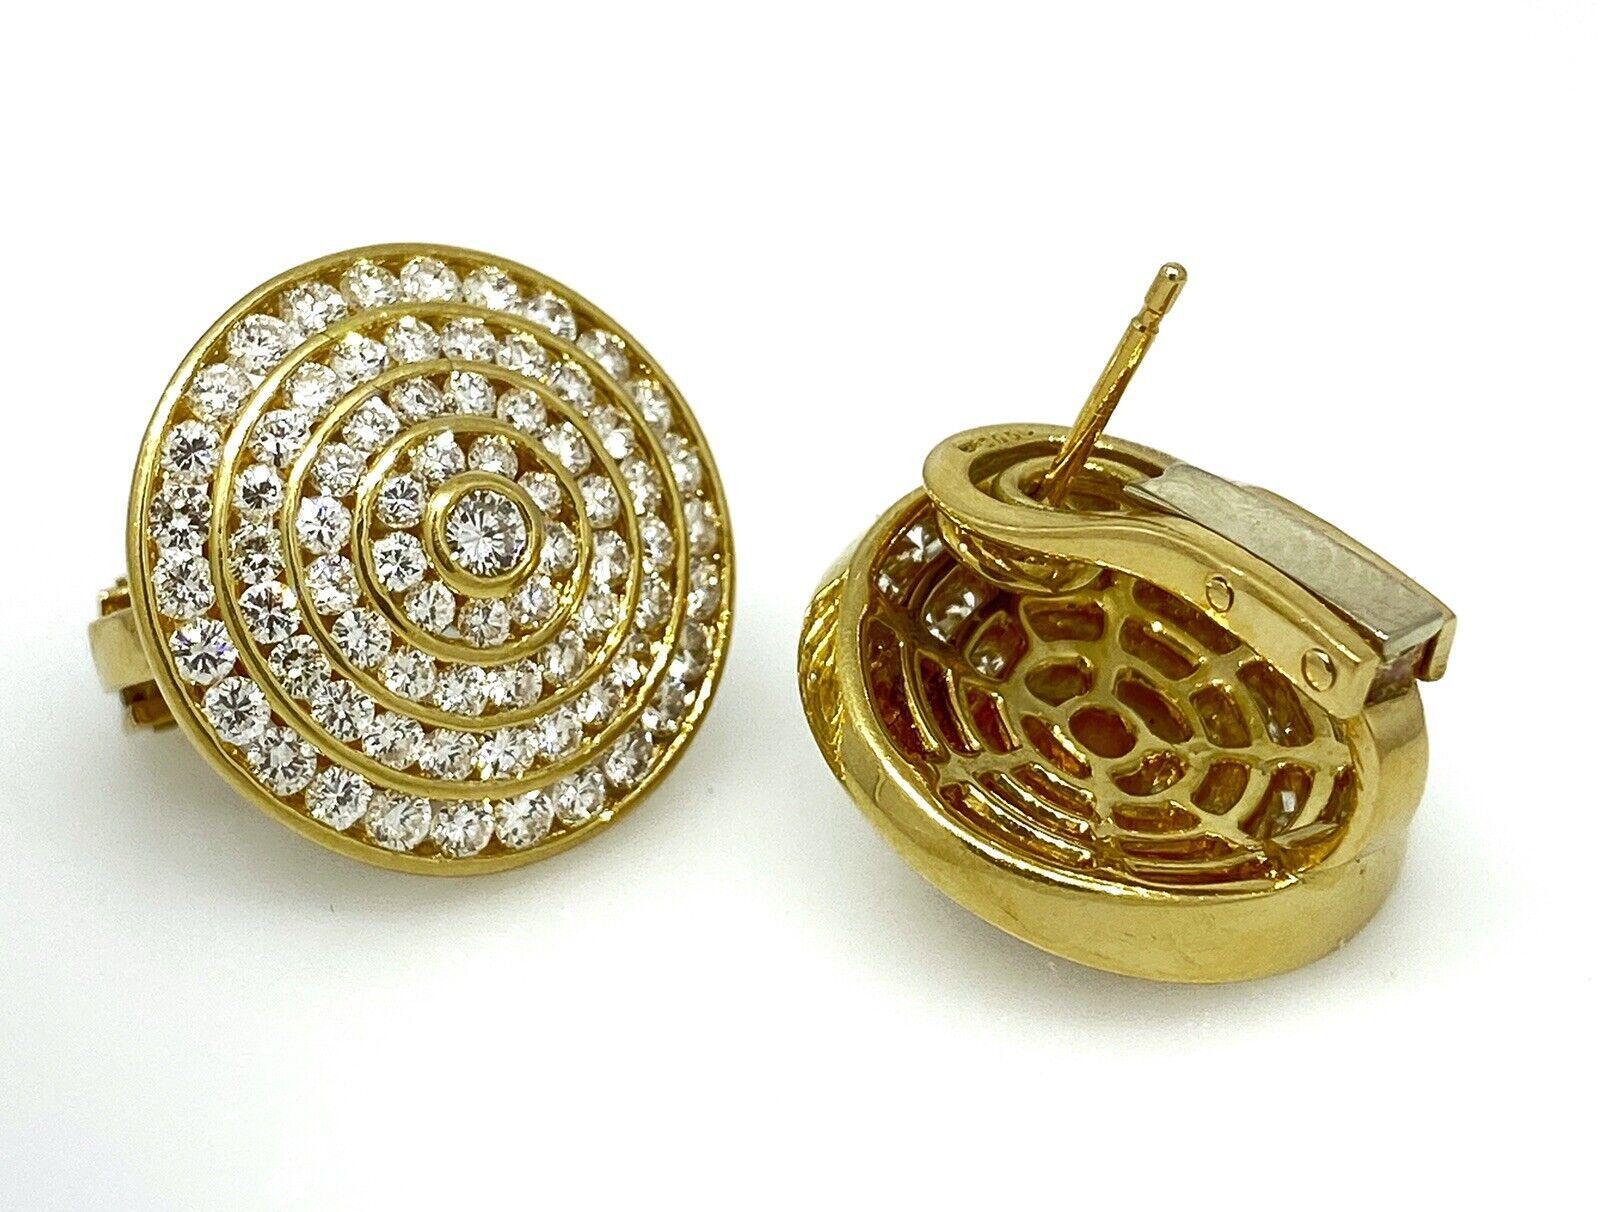 4 Row Circle Diamond Earrings 3.95 carat total weight in 18k Yellow Gold In Excellent Condition For Sale In La Jolla, CA